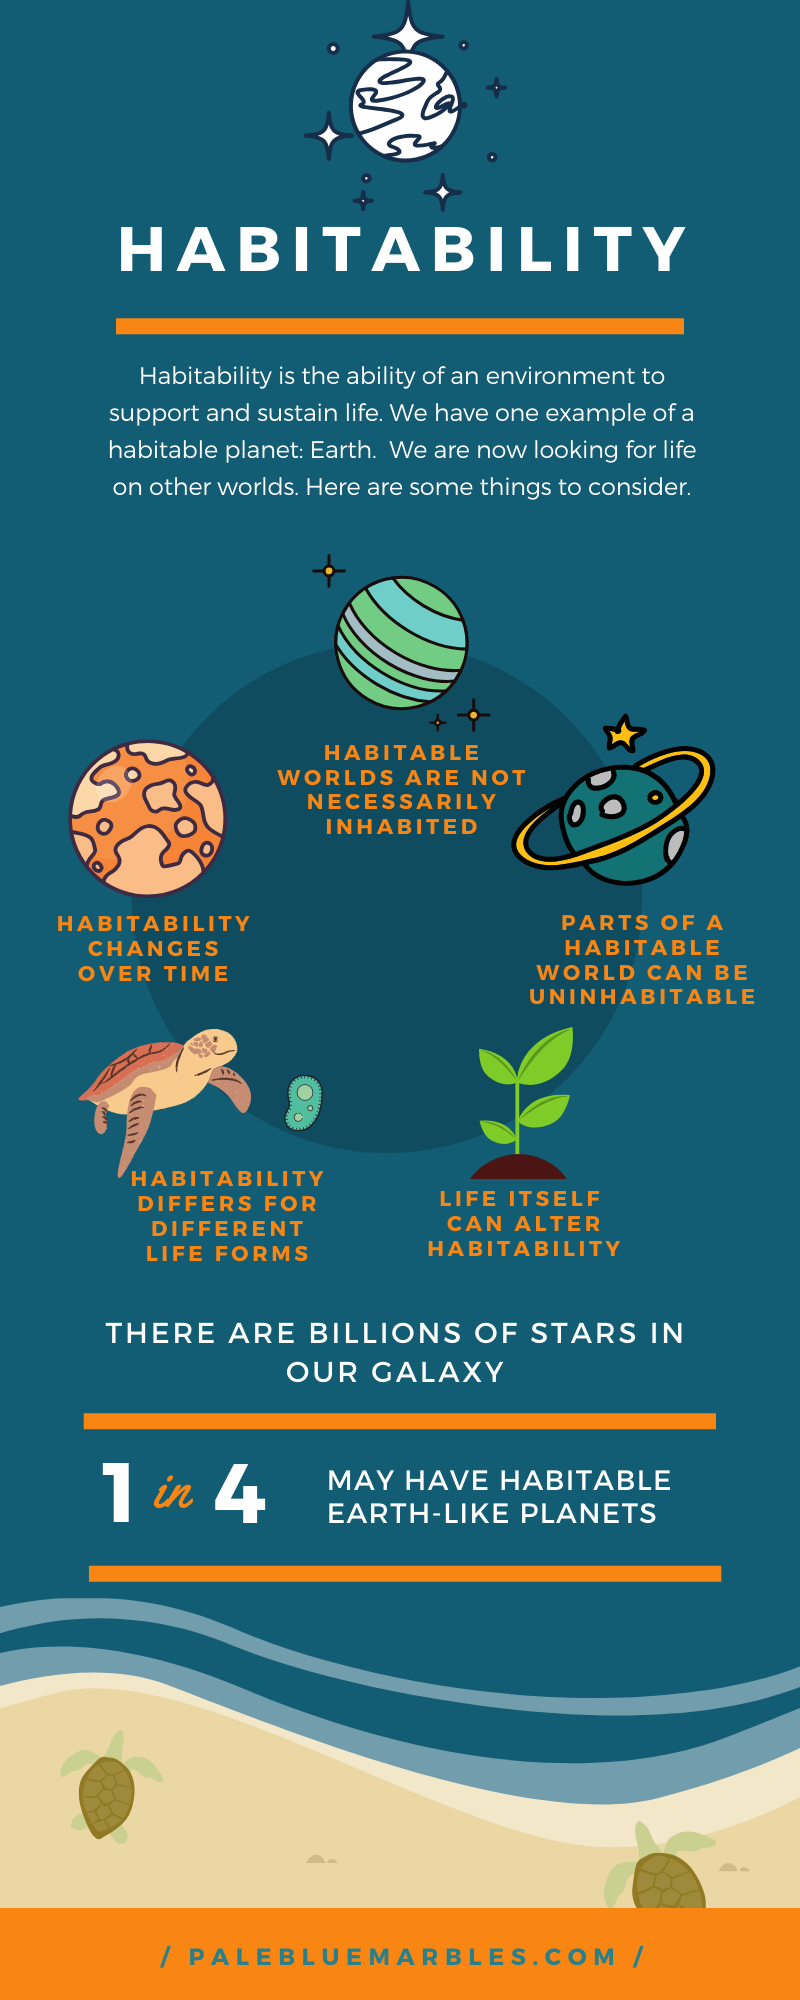 Things to consider when thinking about planetary habitability